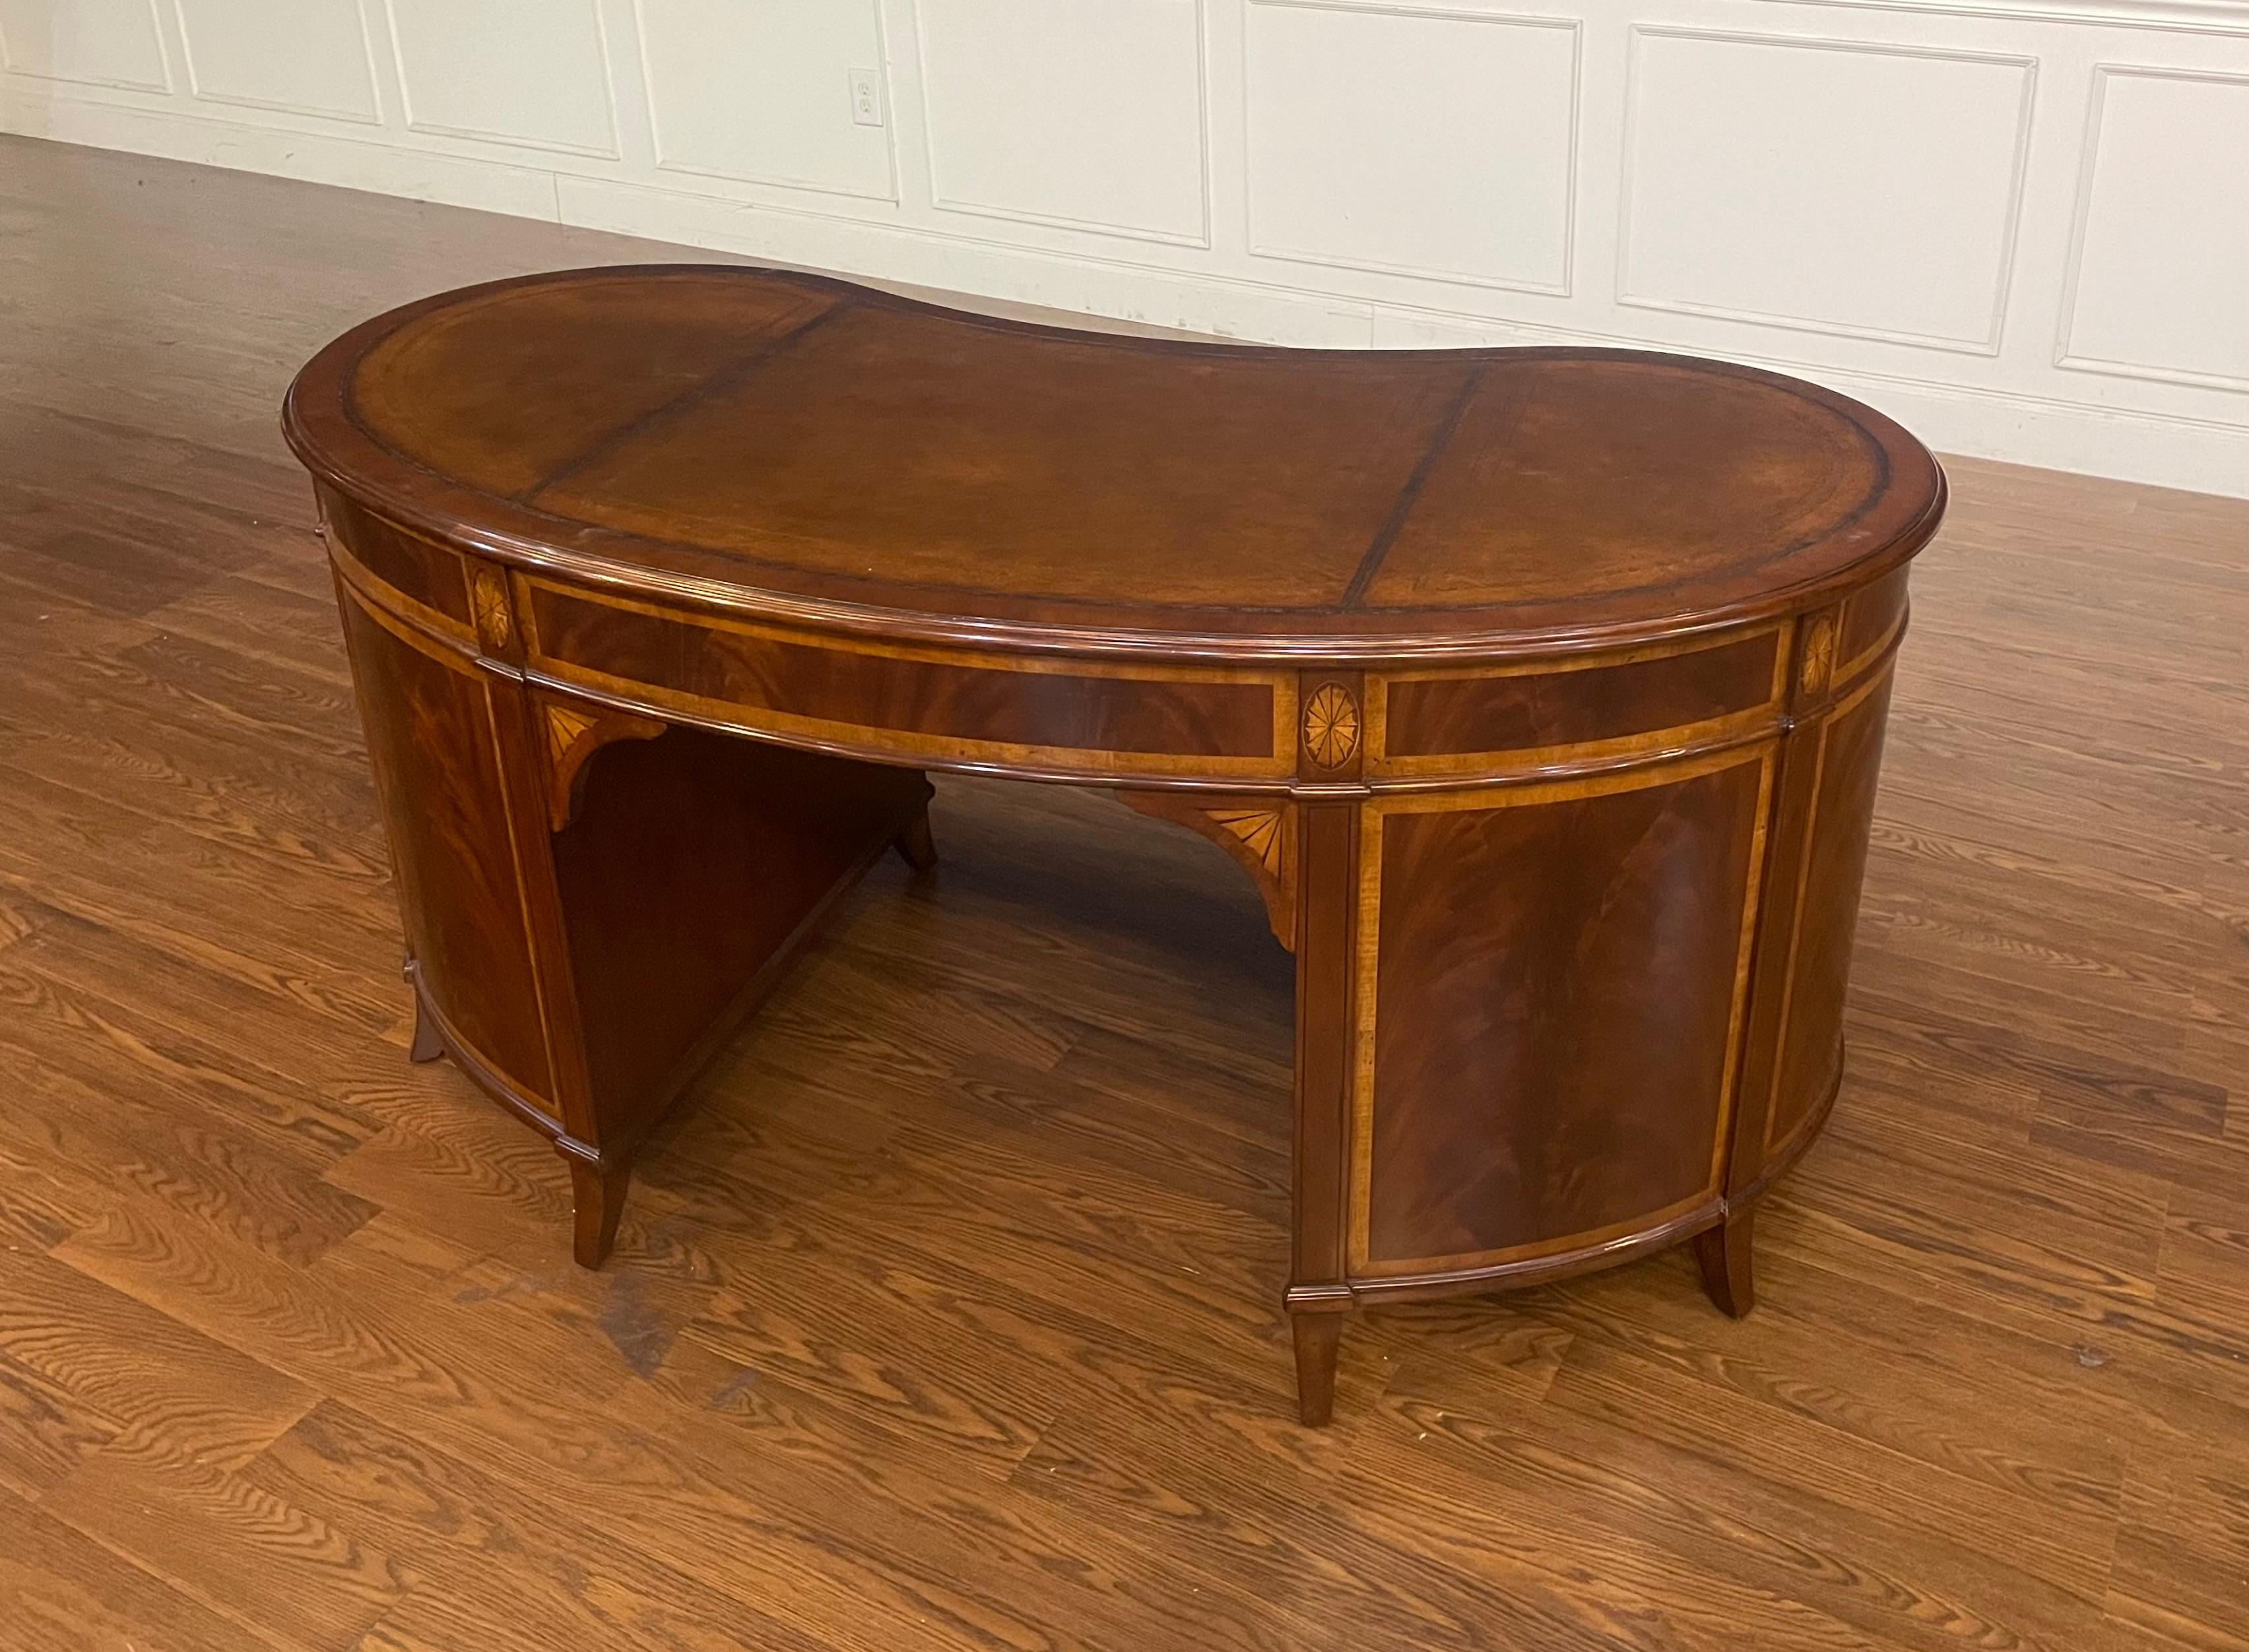 Mahogany Kidney Shaped Desk by Leighton Hall In New Condition For Sale In Suwanee, GA